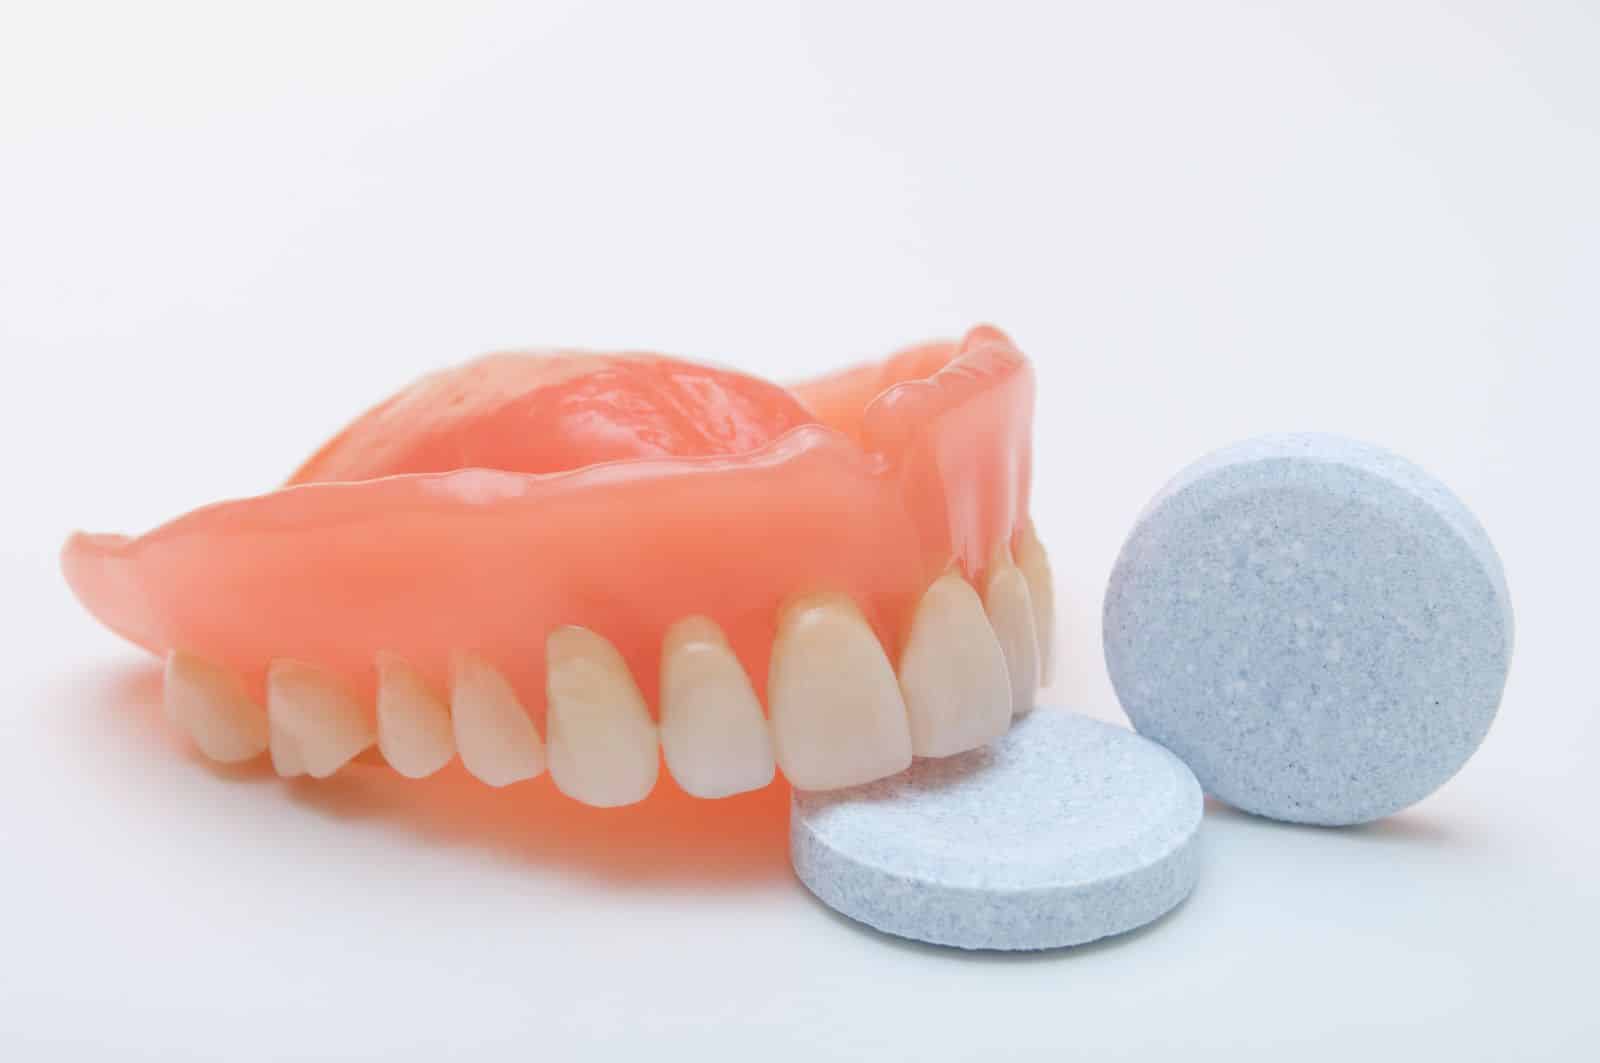 dentures with tablets